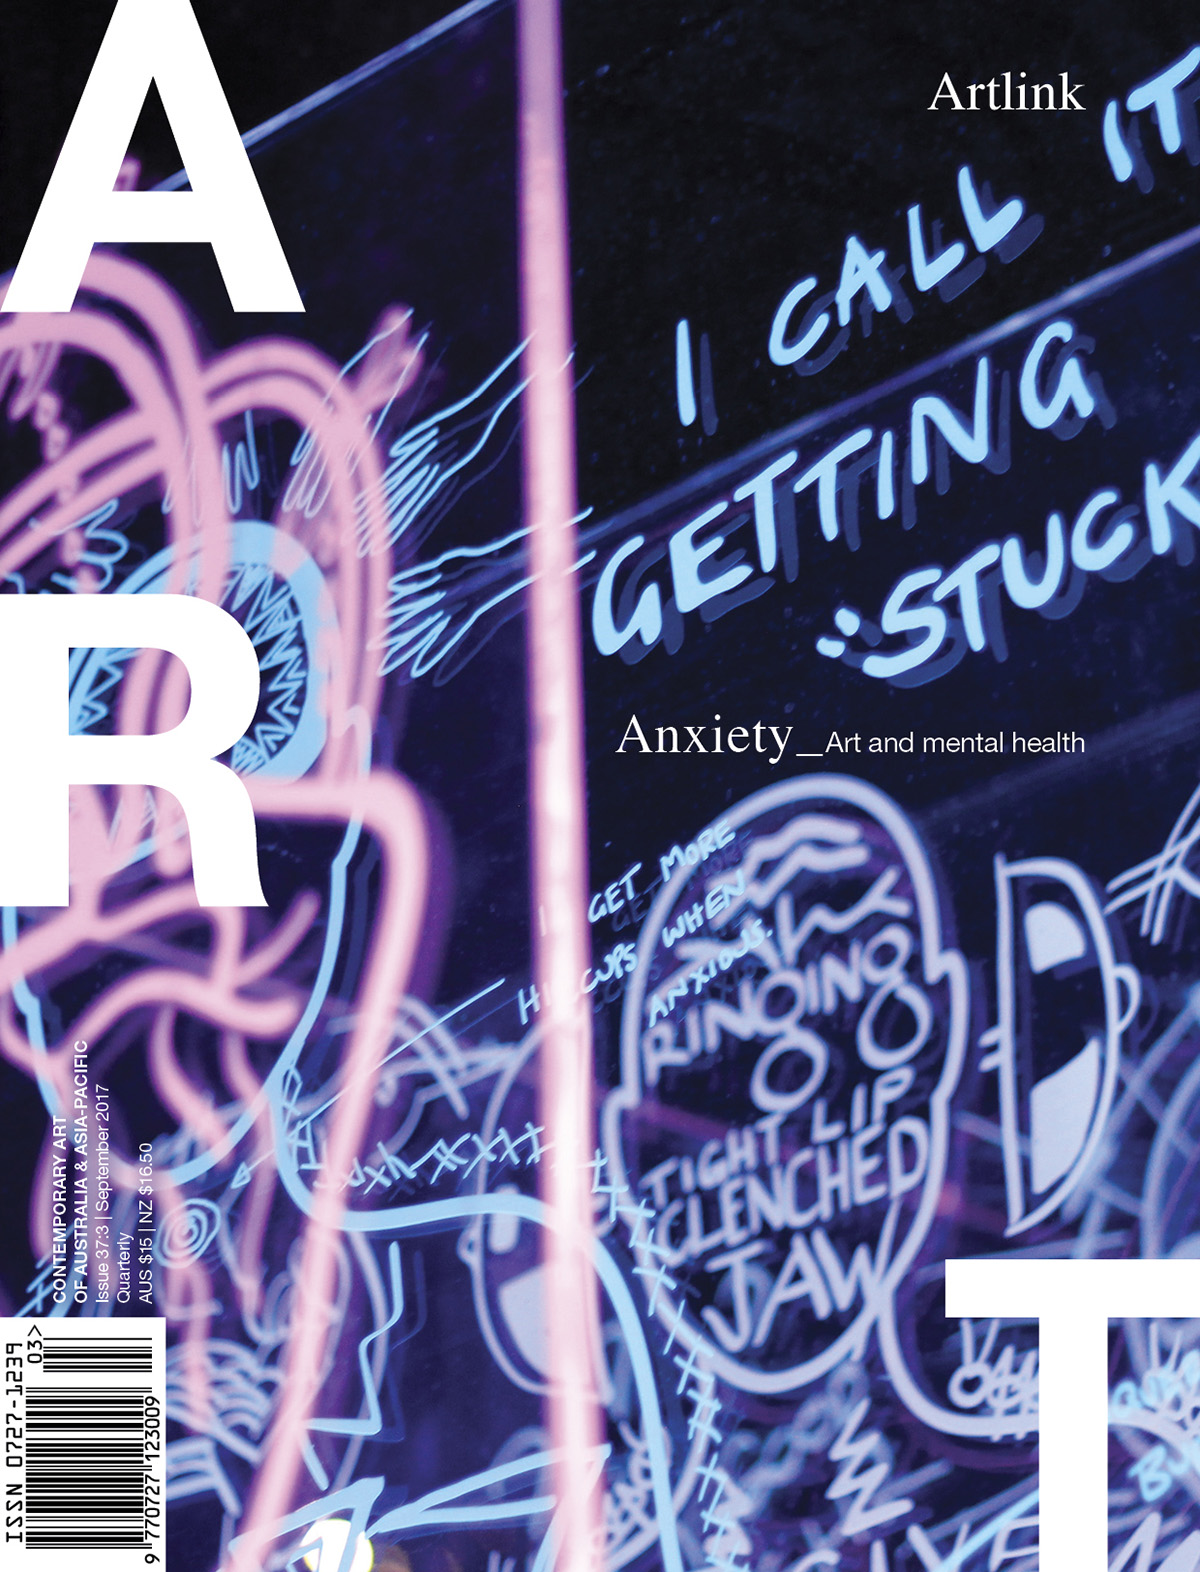 Issue 37:3 | September 2017 | Anxiety: Art and mental health